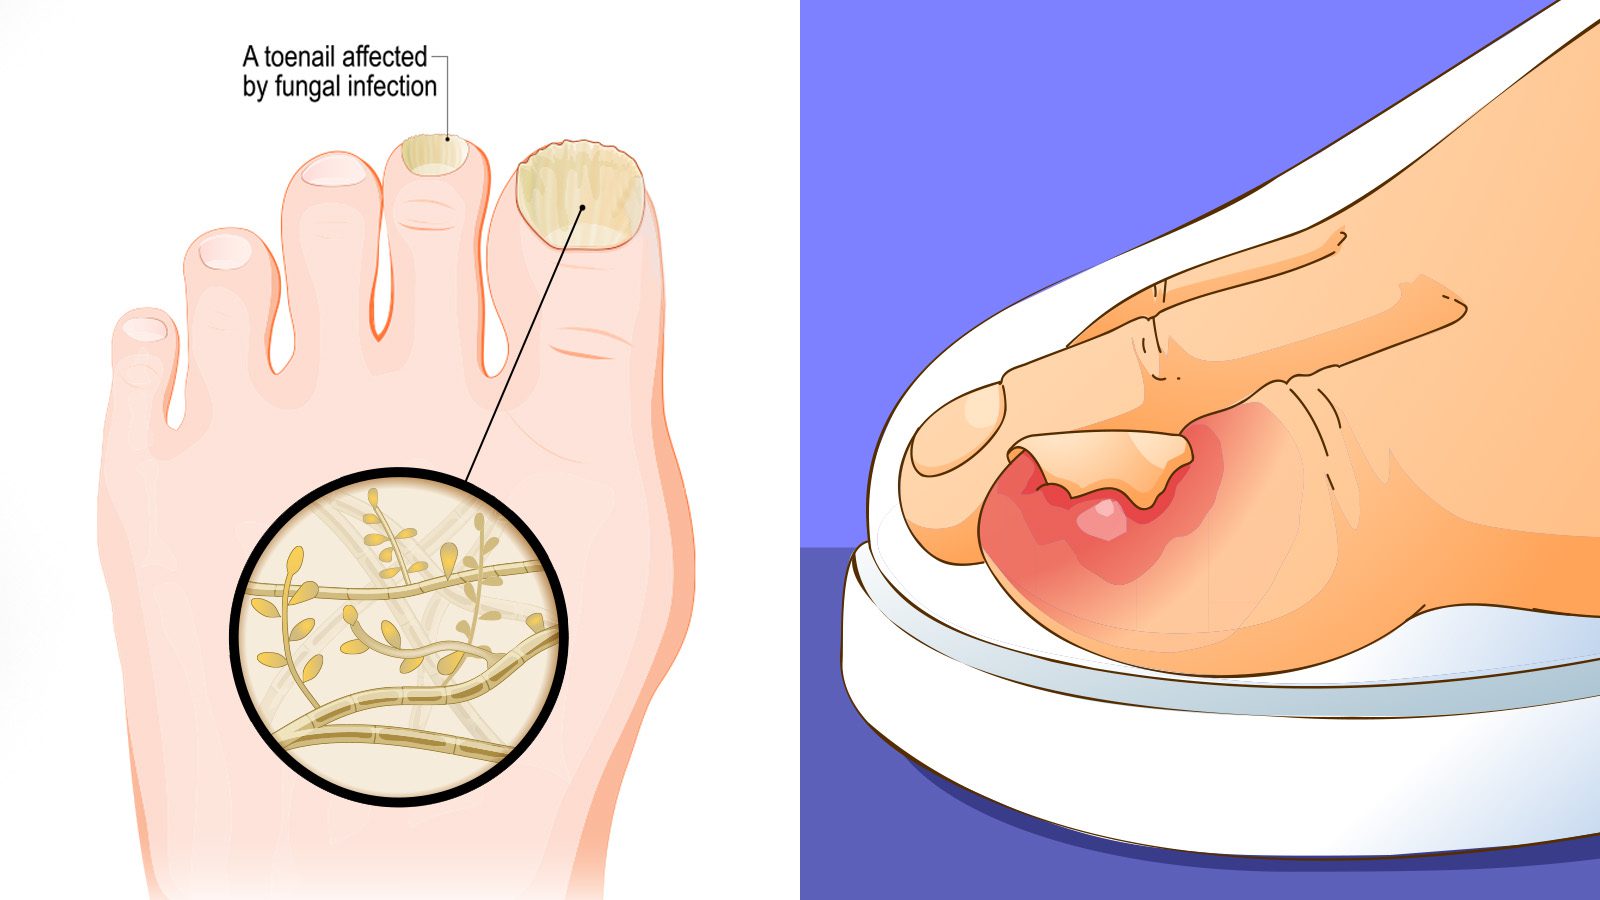 Dermatologists Explain the Causes of Toenail Infections (and How to Fix It)